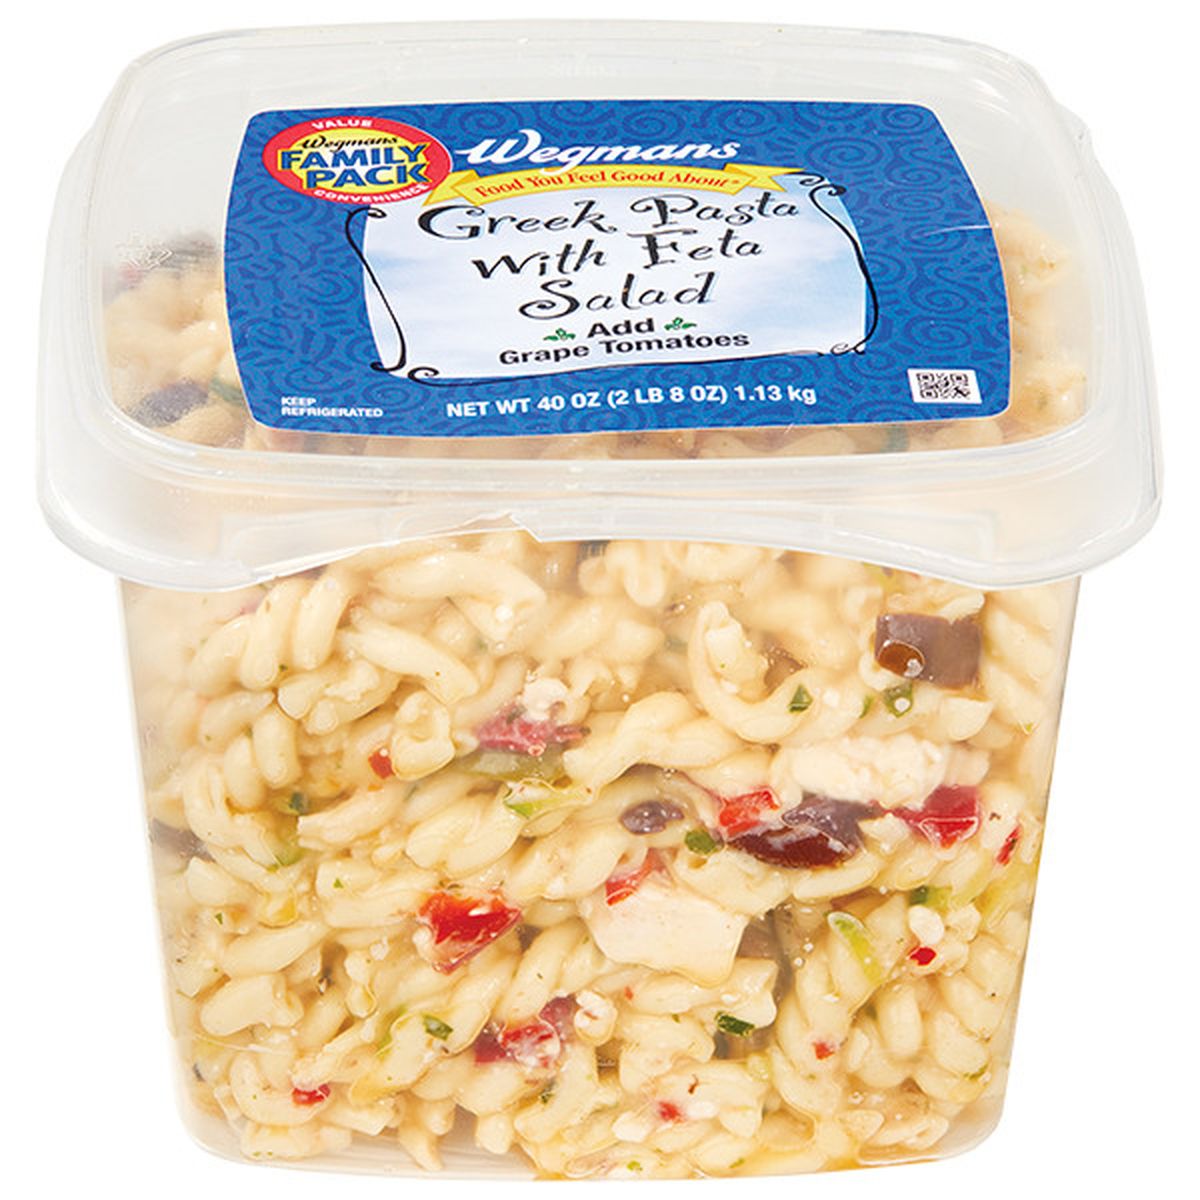 Calories in Wegmans Greek Pasta Salad with Feta, FAMILY PACK